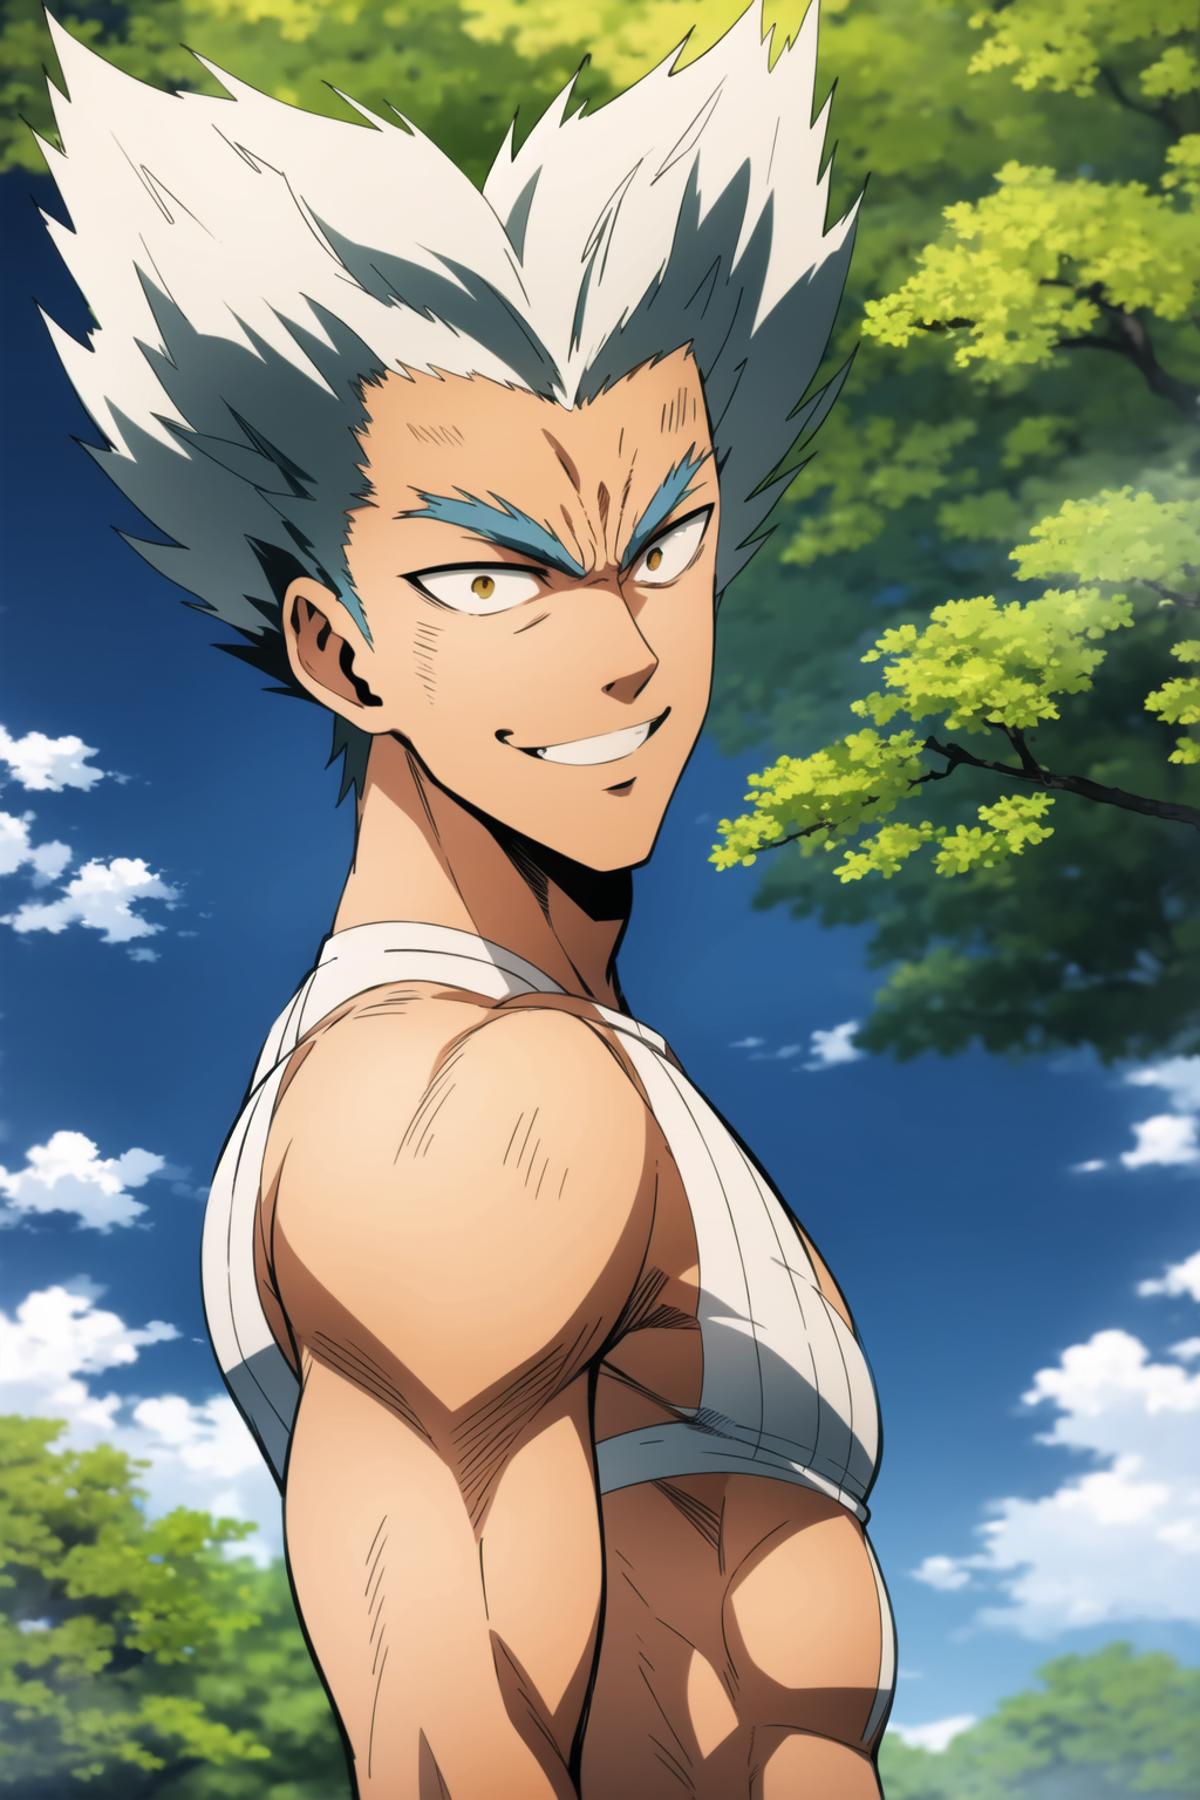 Garou (One Punch Man) image by Maximax67